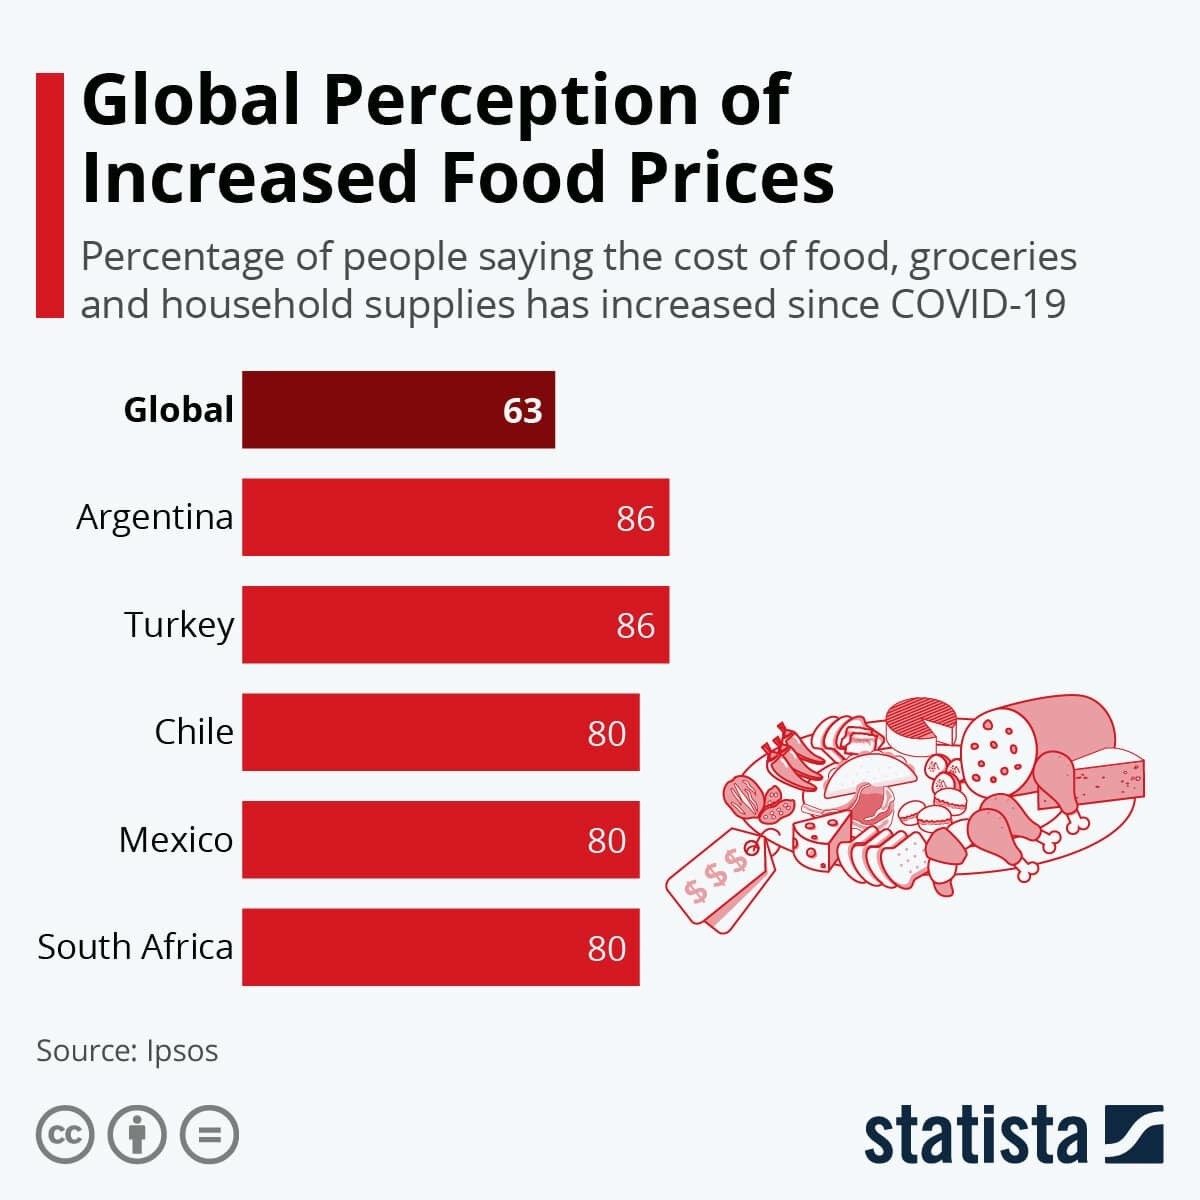 Global Perception of Increased Food Prices